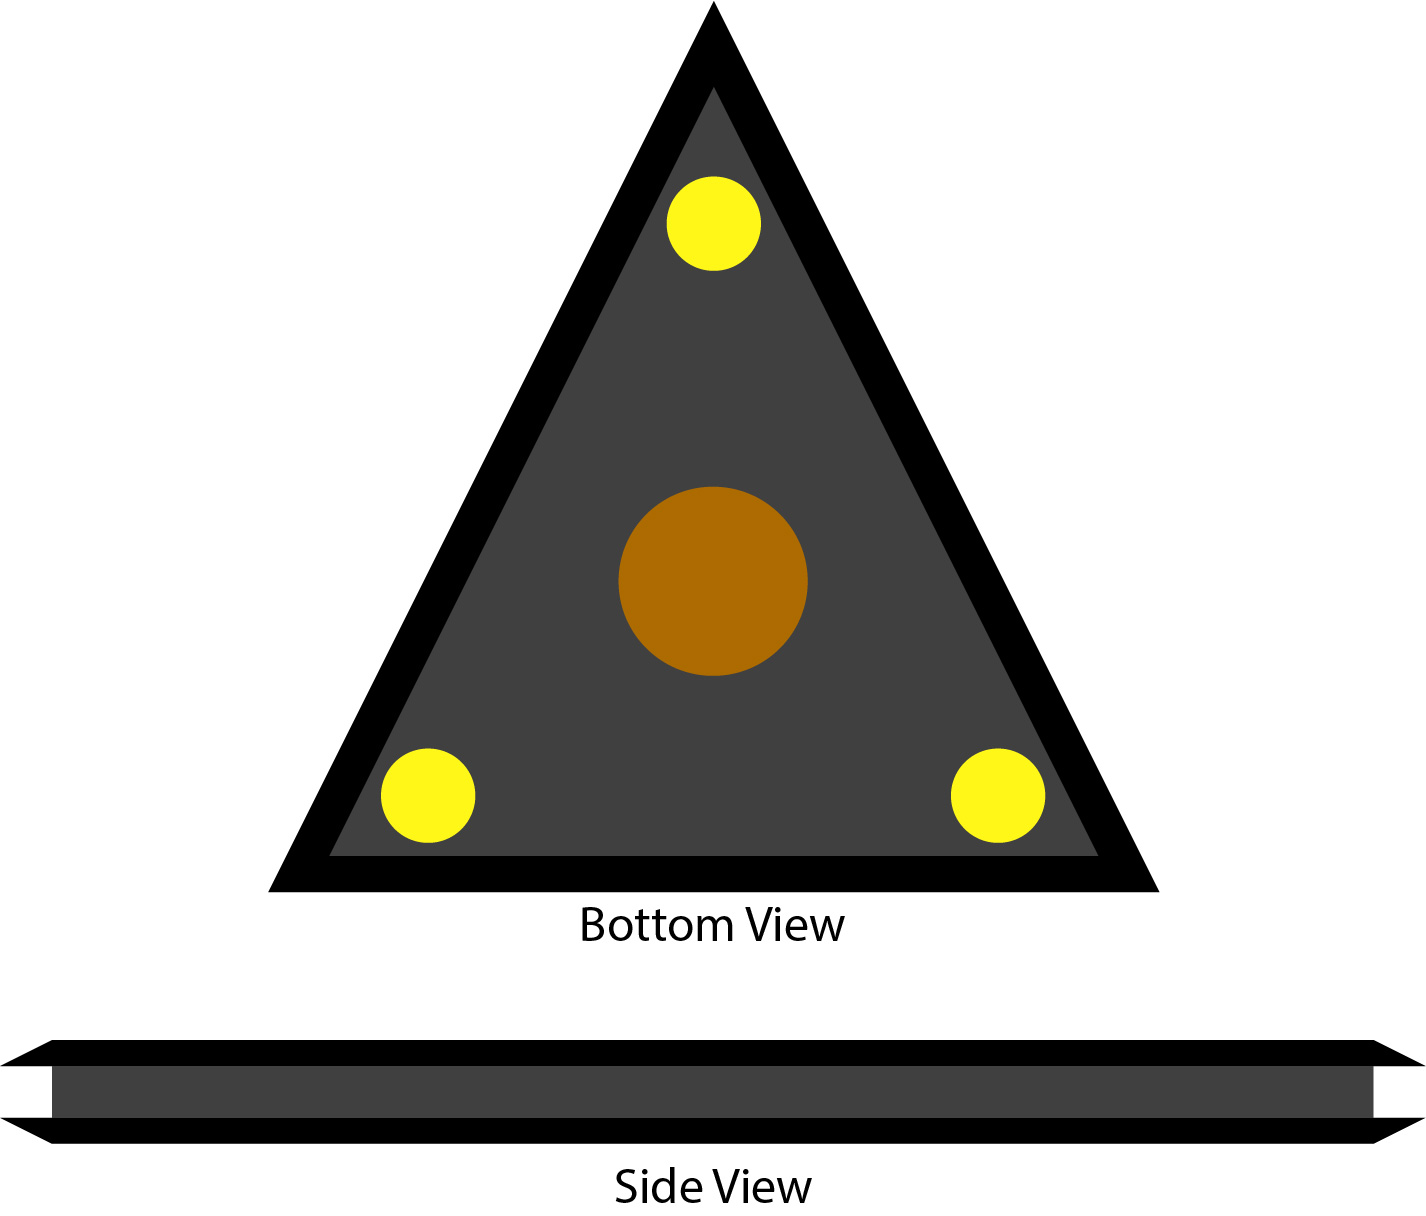 Triangle object, 3 lights @ each corner, larger red/yellow light in center